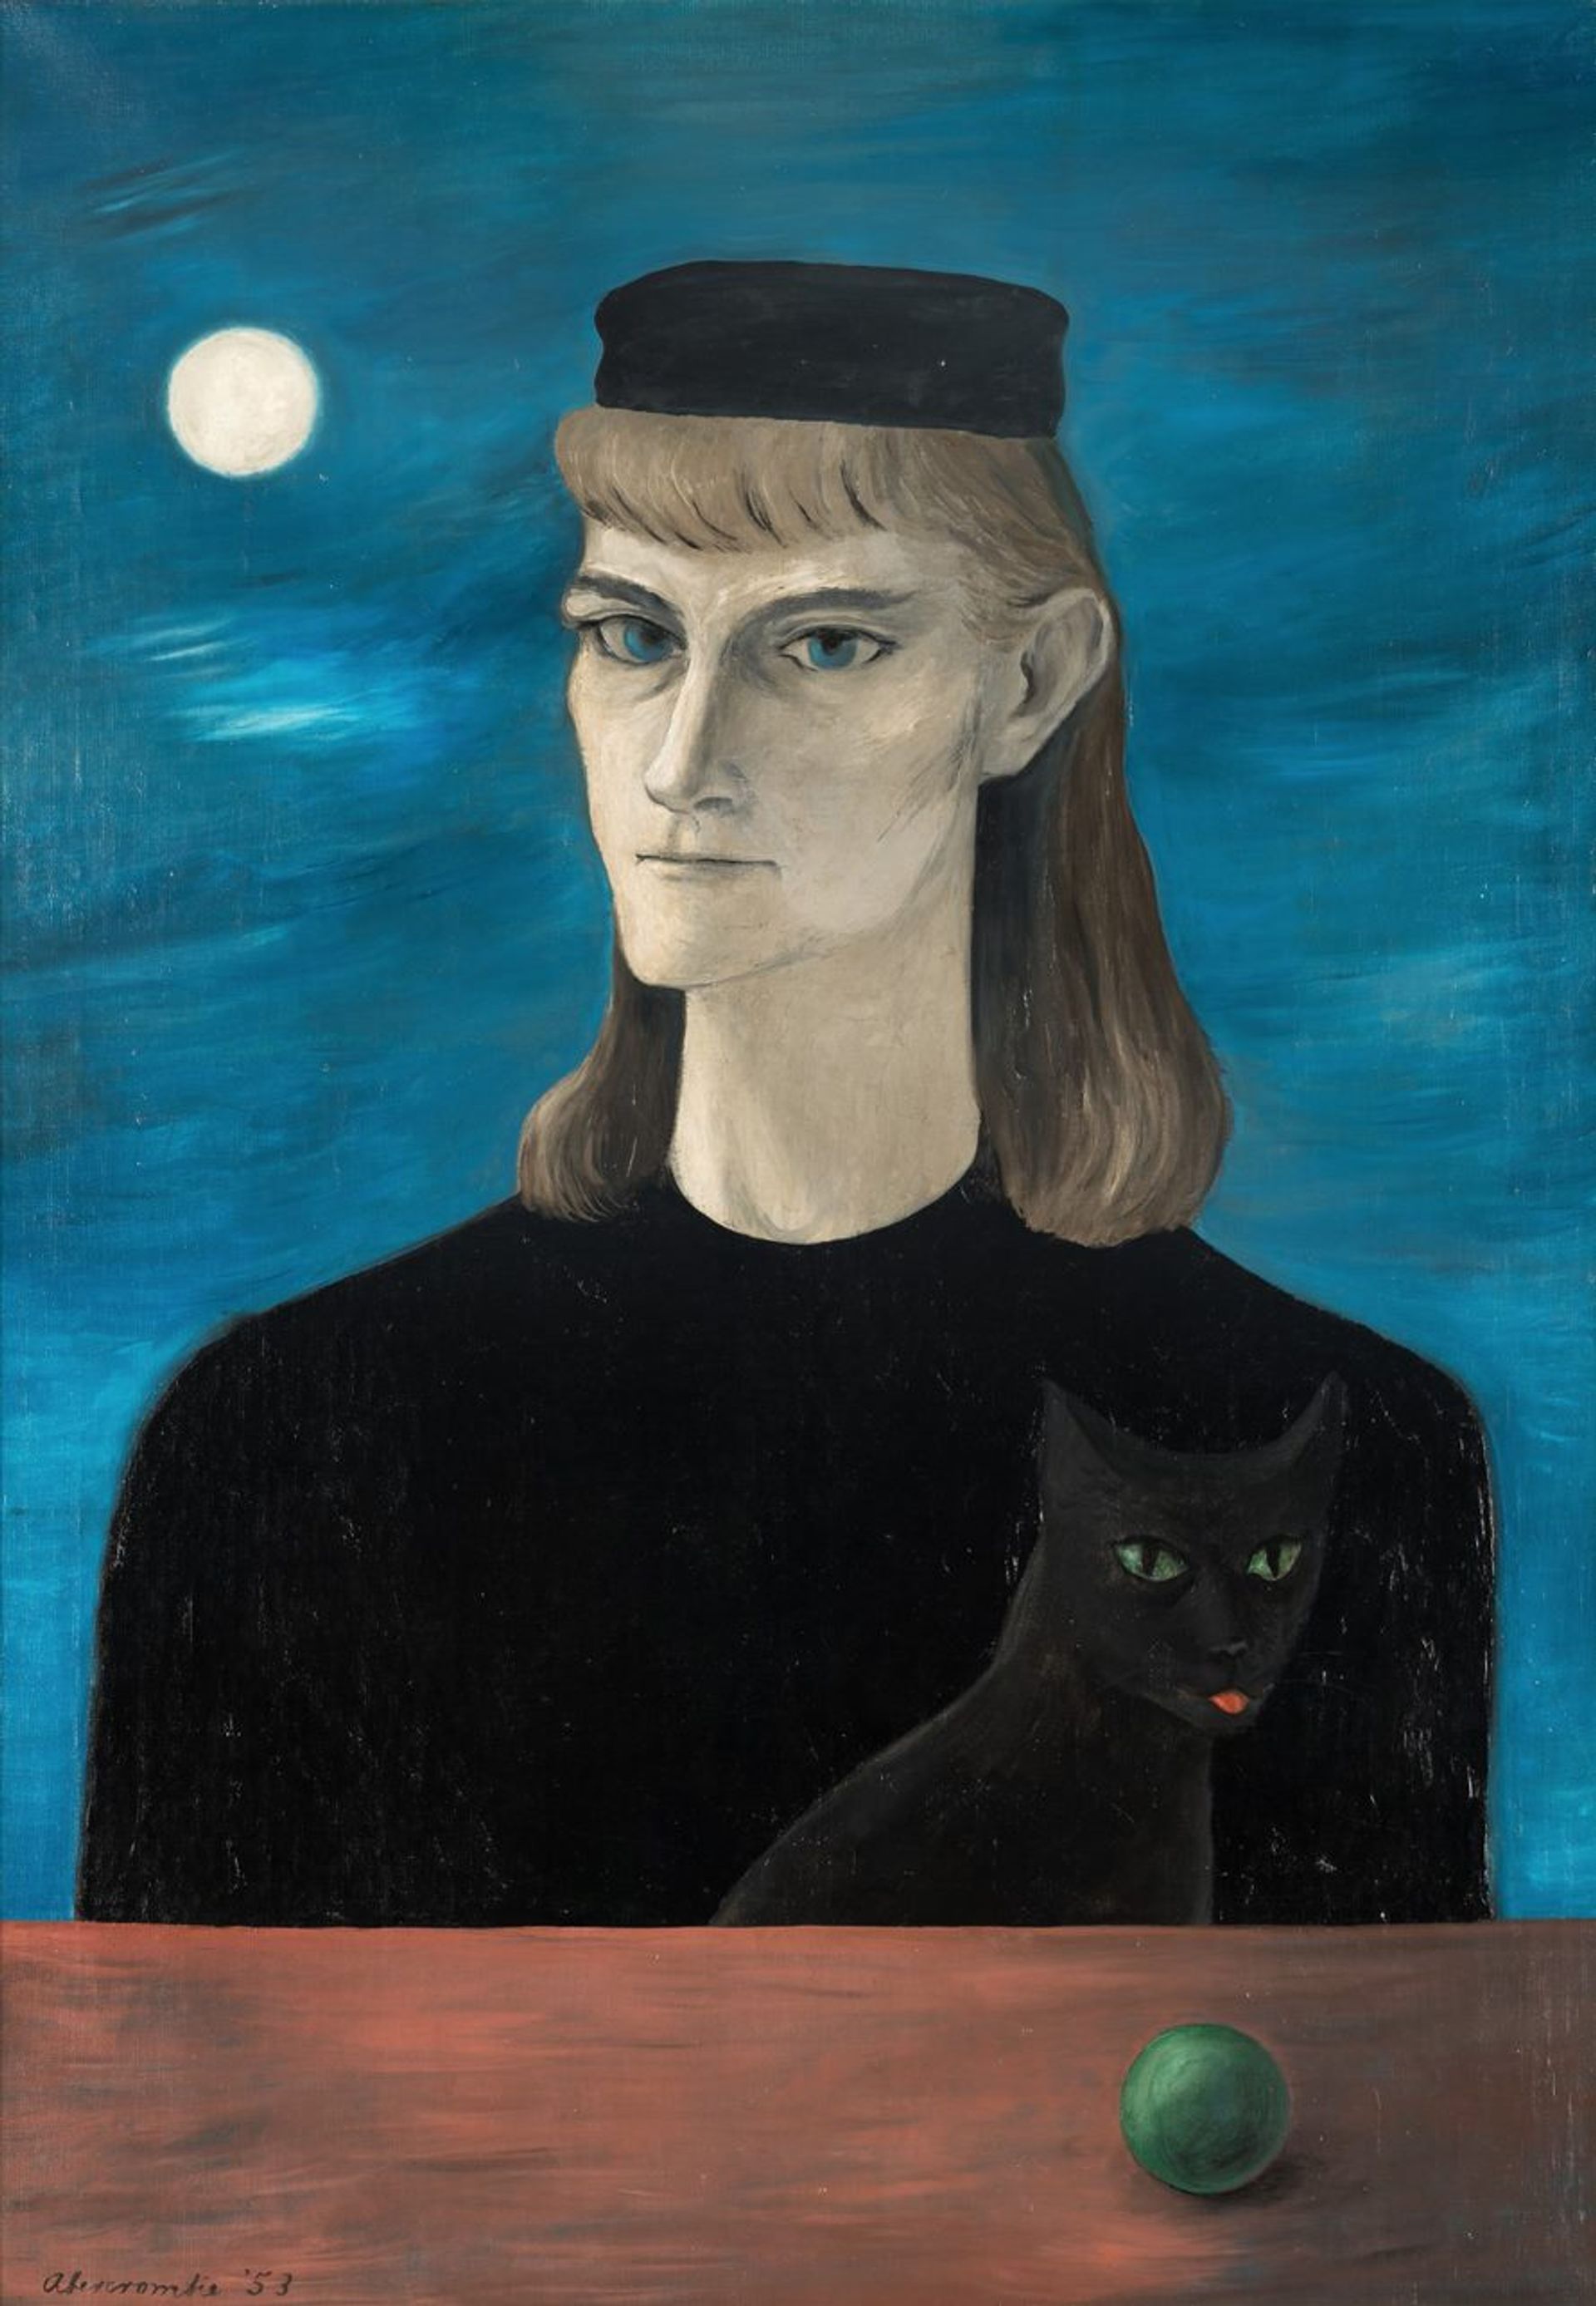 Gertrude Abercrombie, Self and Cat (Possims) (1953) (est $300,000-$500,000) at Hindman's Casting Spells: The Gertrude Abercrombie Collection of Laura and Gary Maurer on September 28. Courtesy Hindman Auctions. 